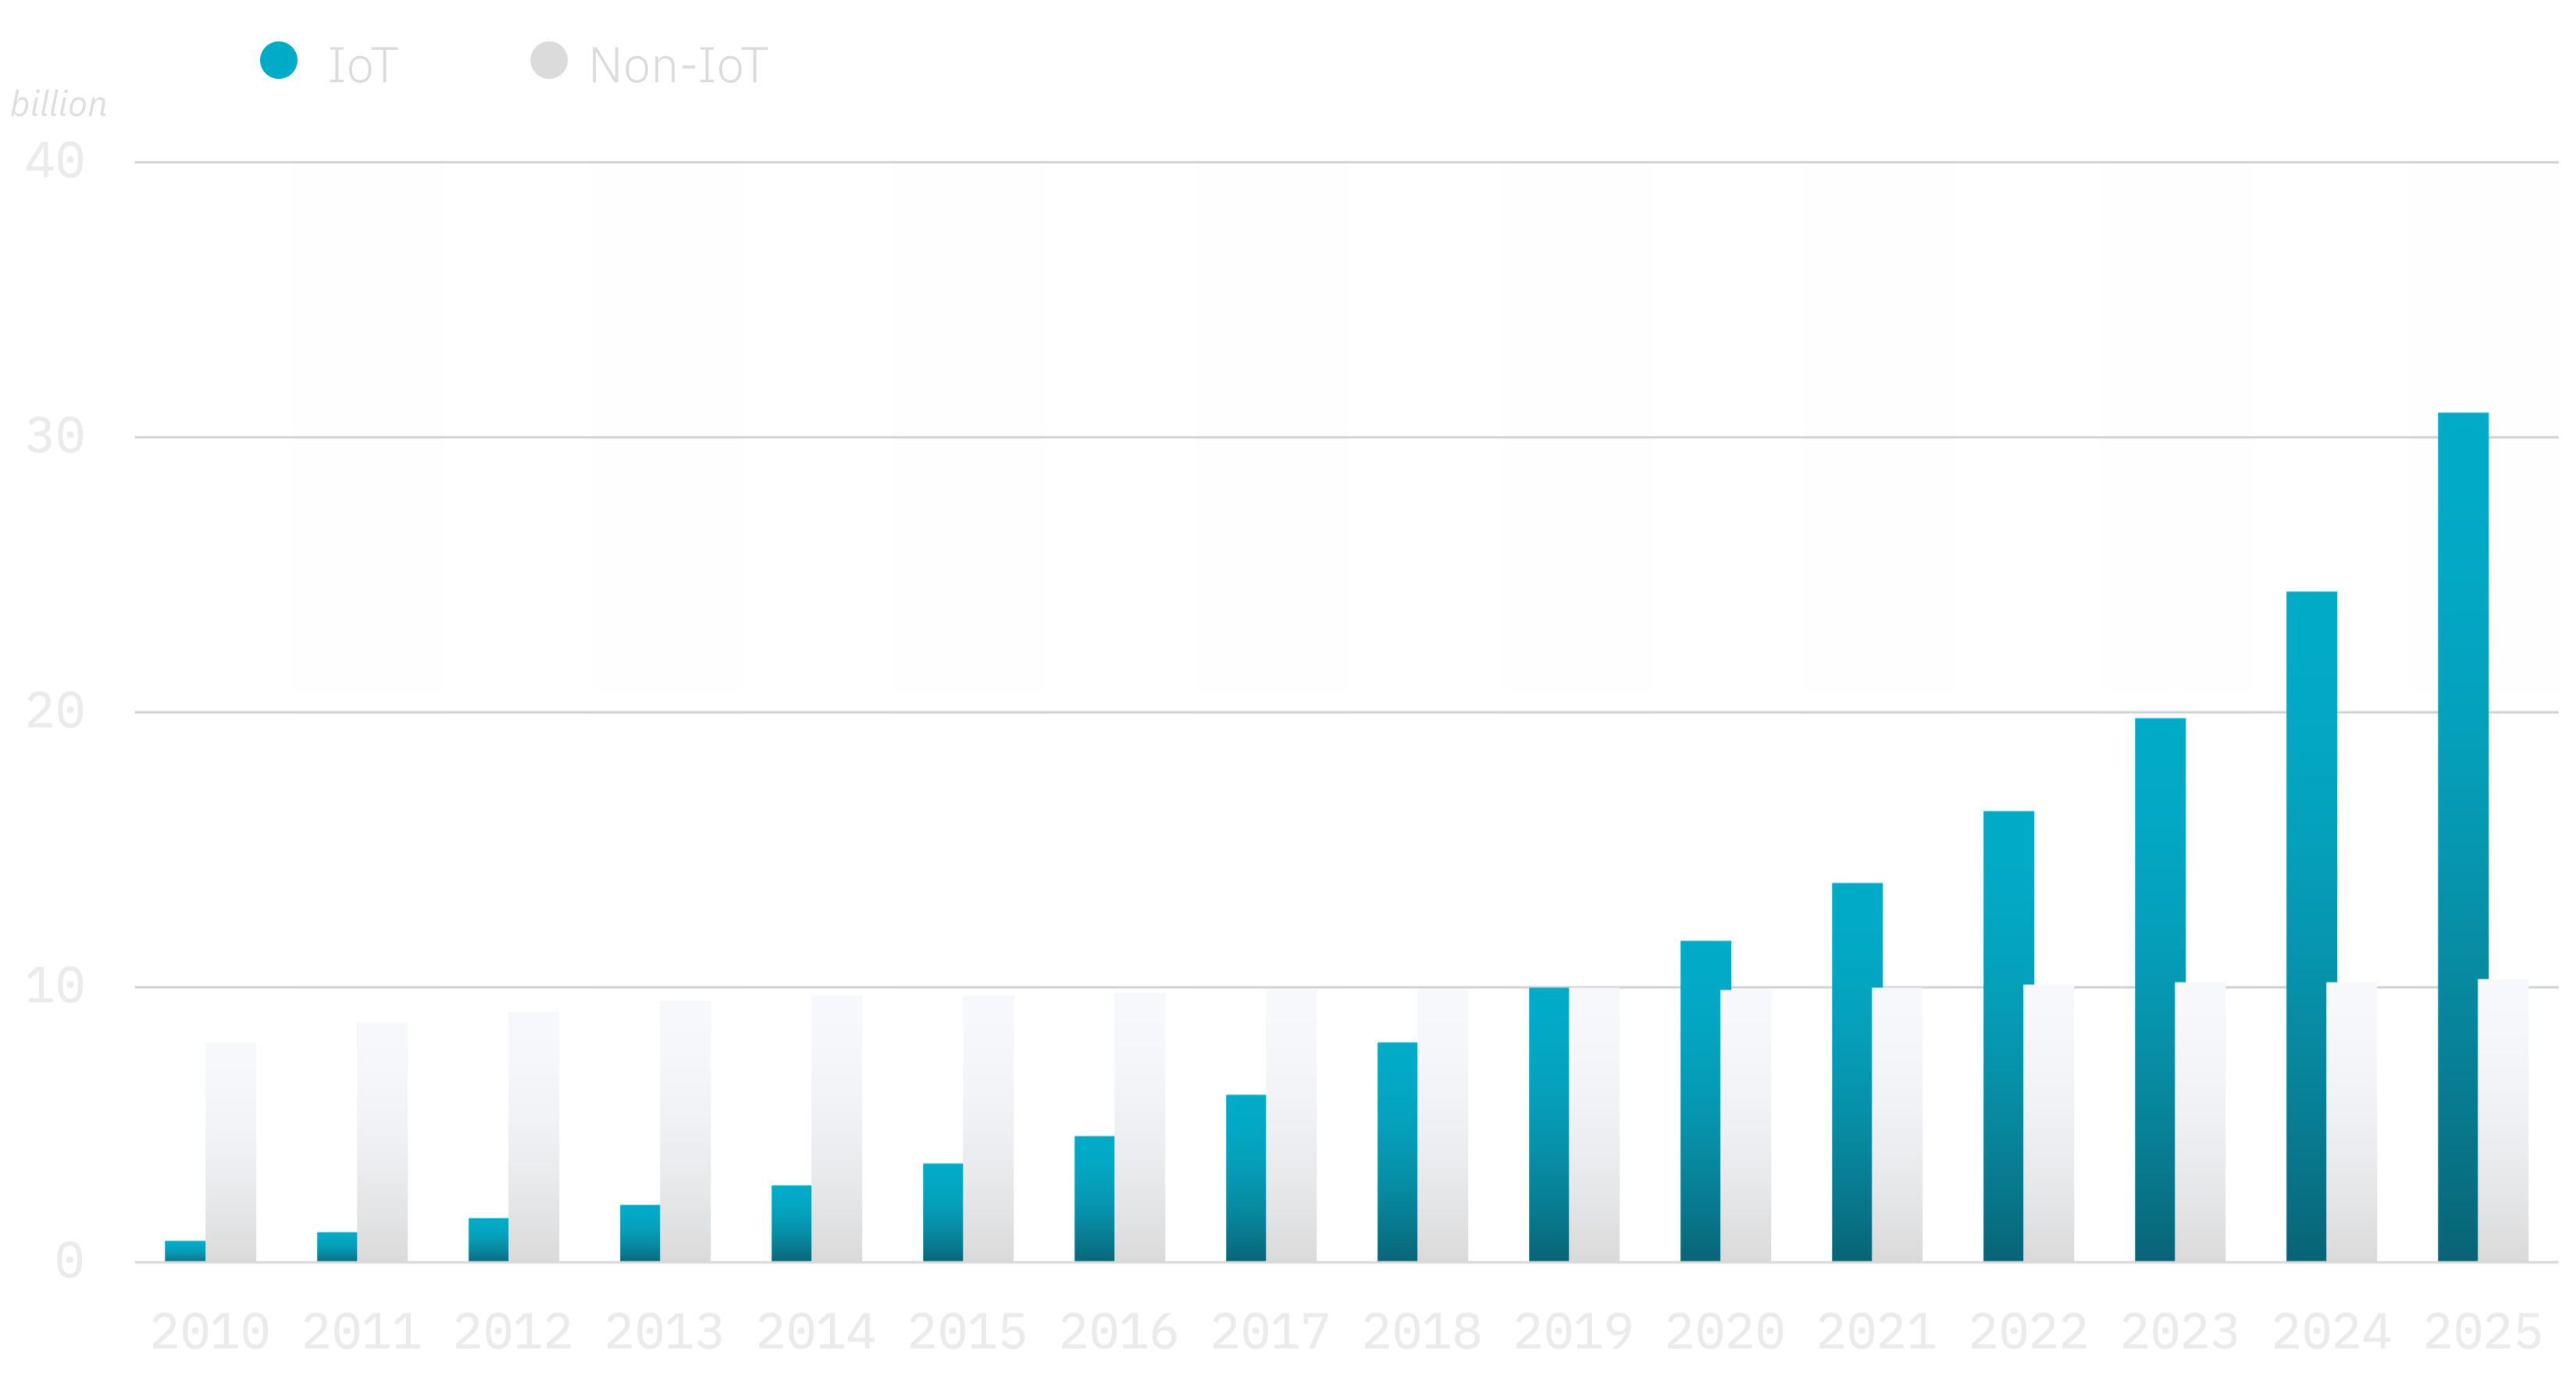 IoT connected devices growth from 2010 to 2030